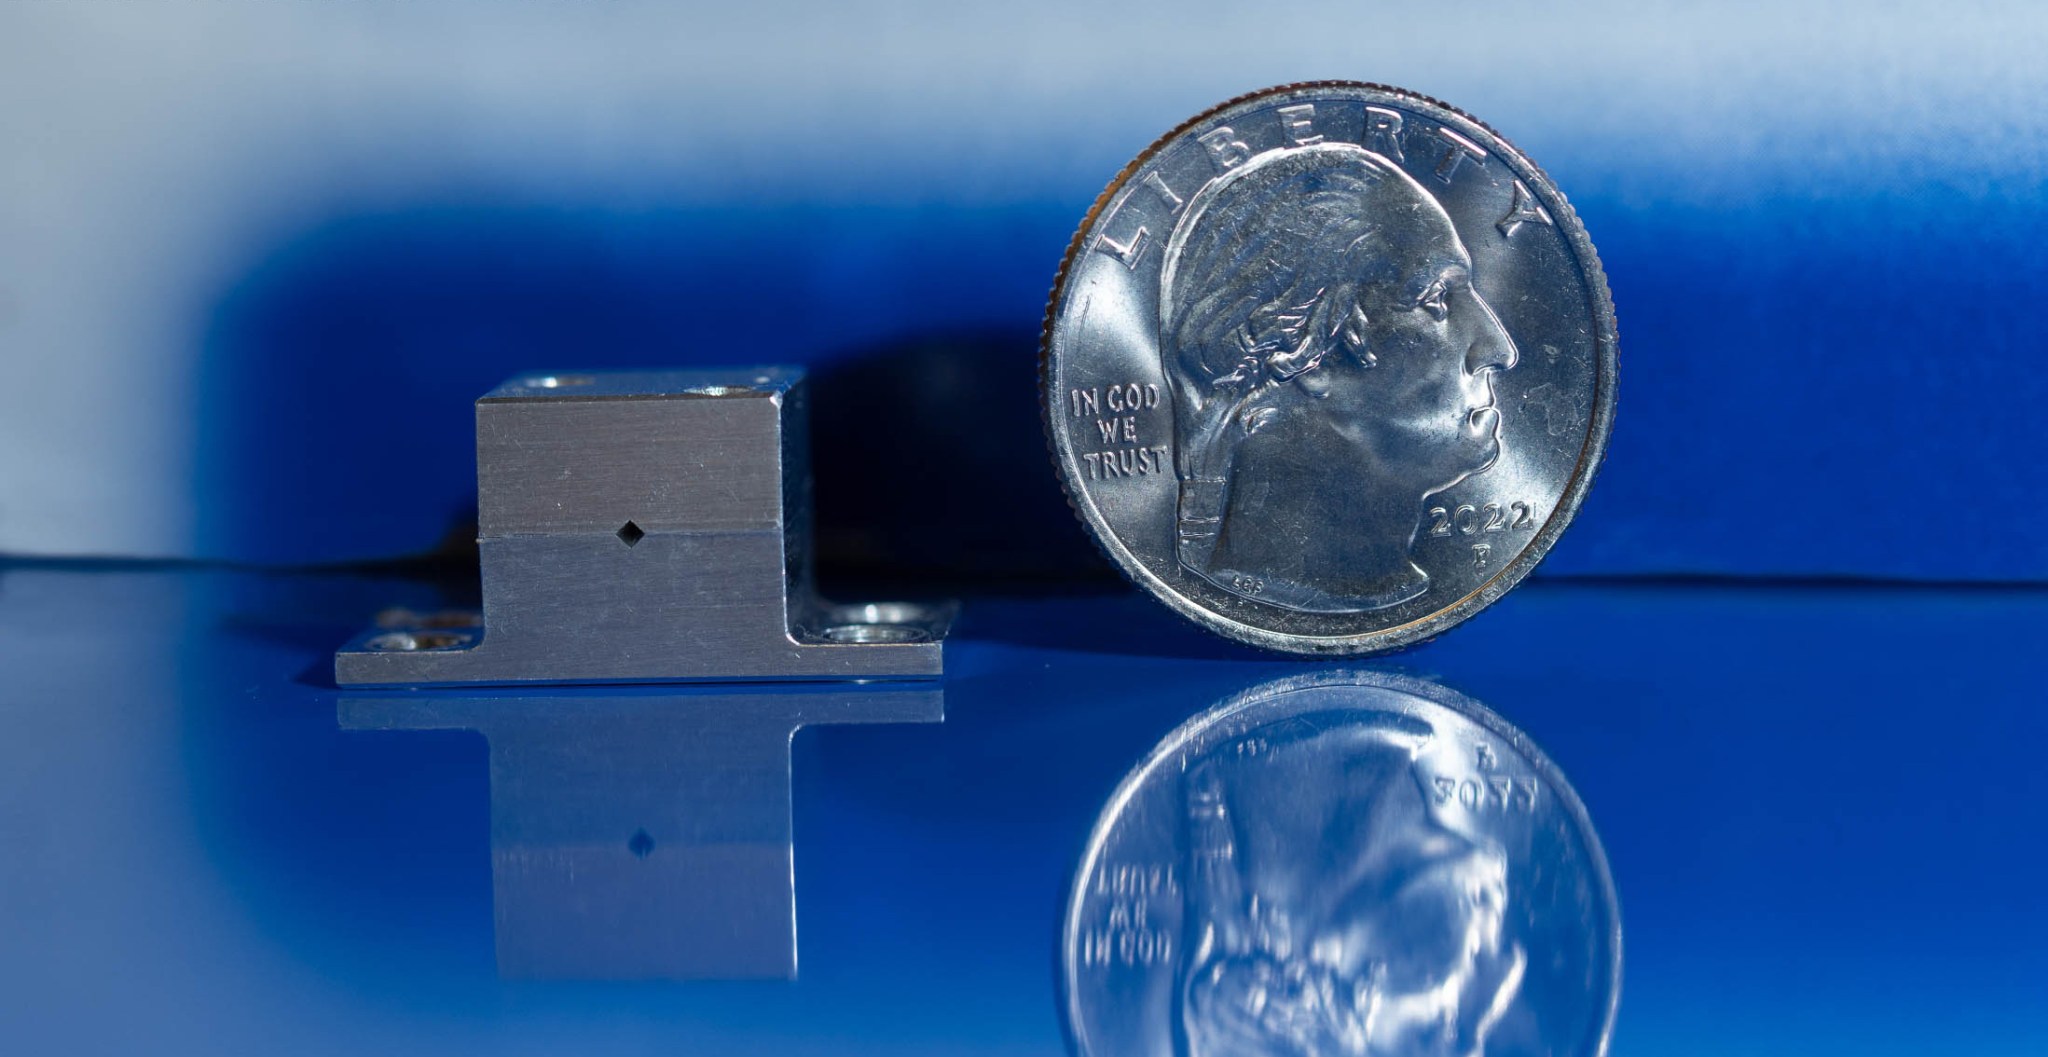 a small metal block sits next to a much larger quarter, reflected on a shiny surface with a blue background